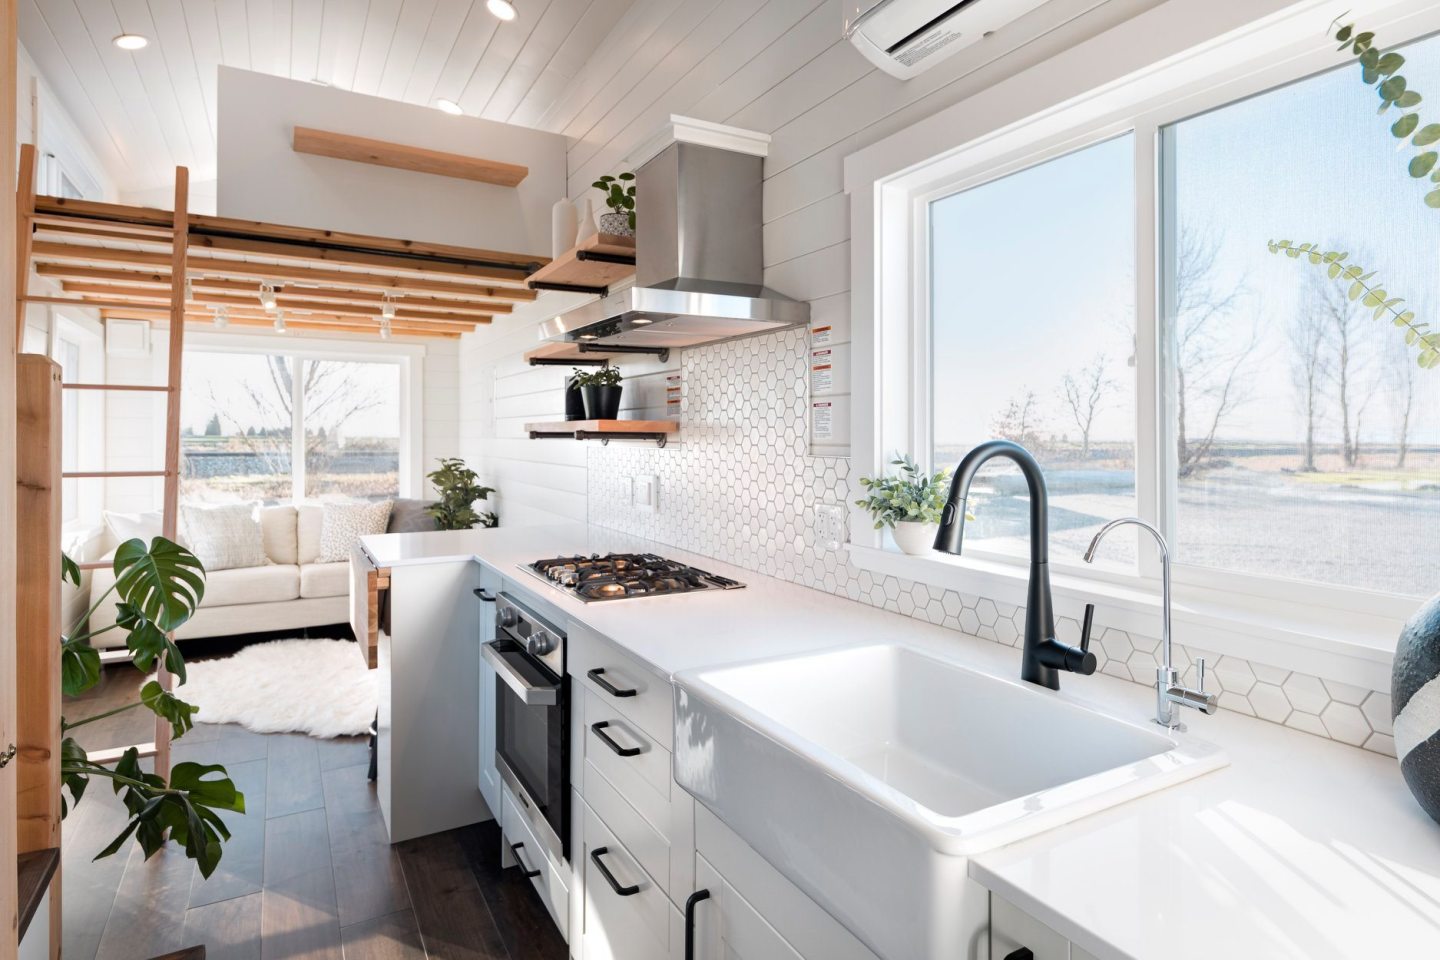 The 34ft Eco-Friendly Tiny House RV's kitchen includes a farmhouse-style sink